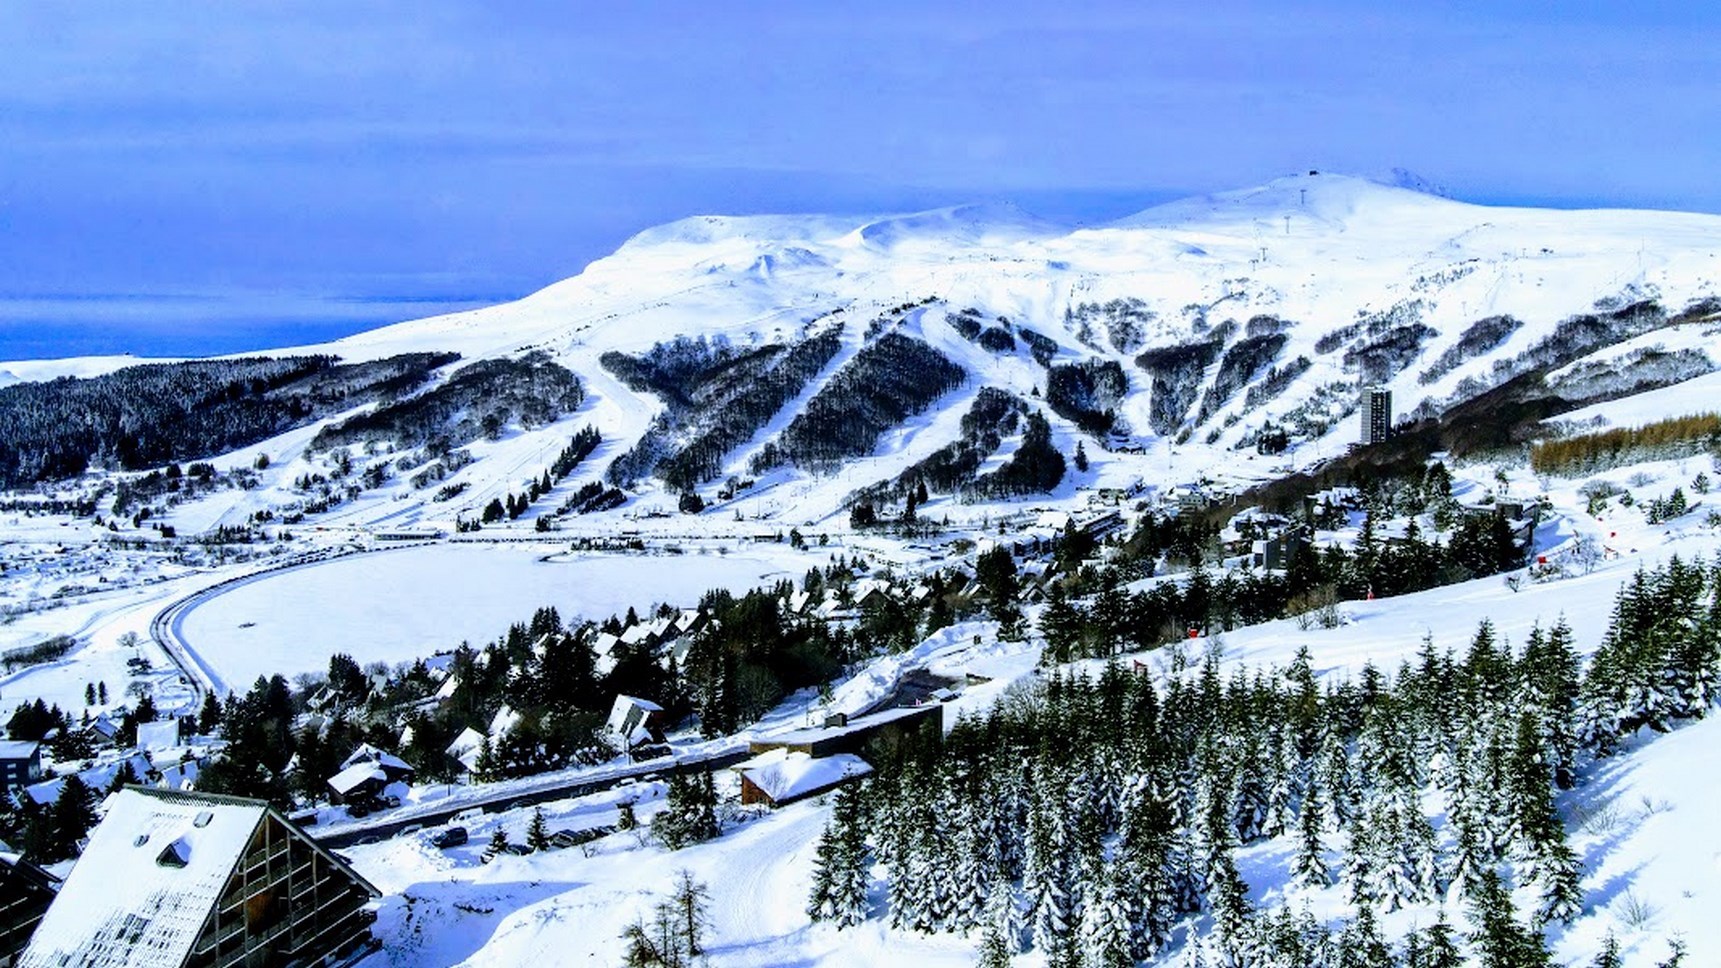 Wide panorama on the ski resort of Super Besse seen to the east of Super Besse